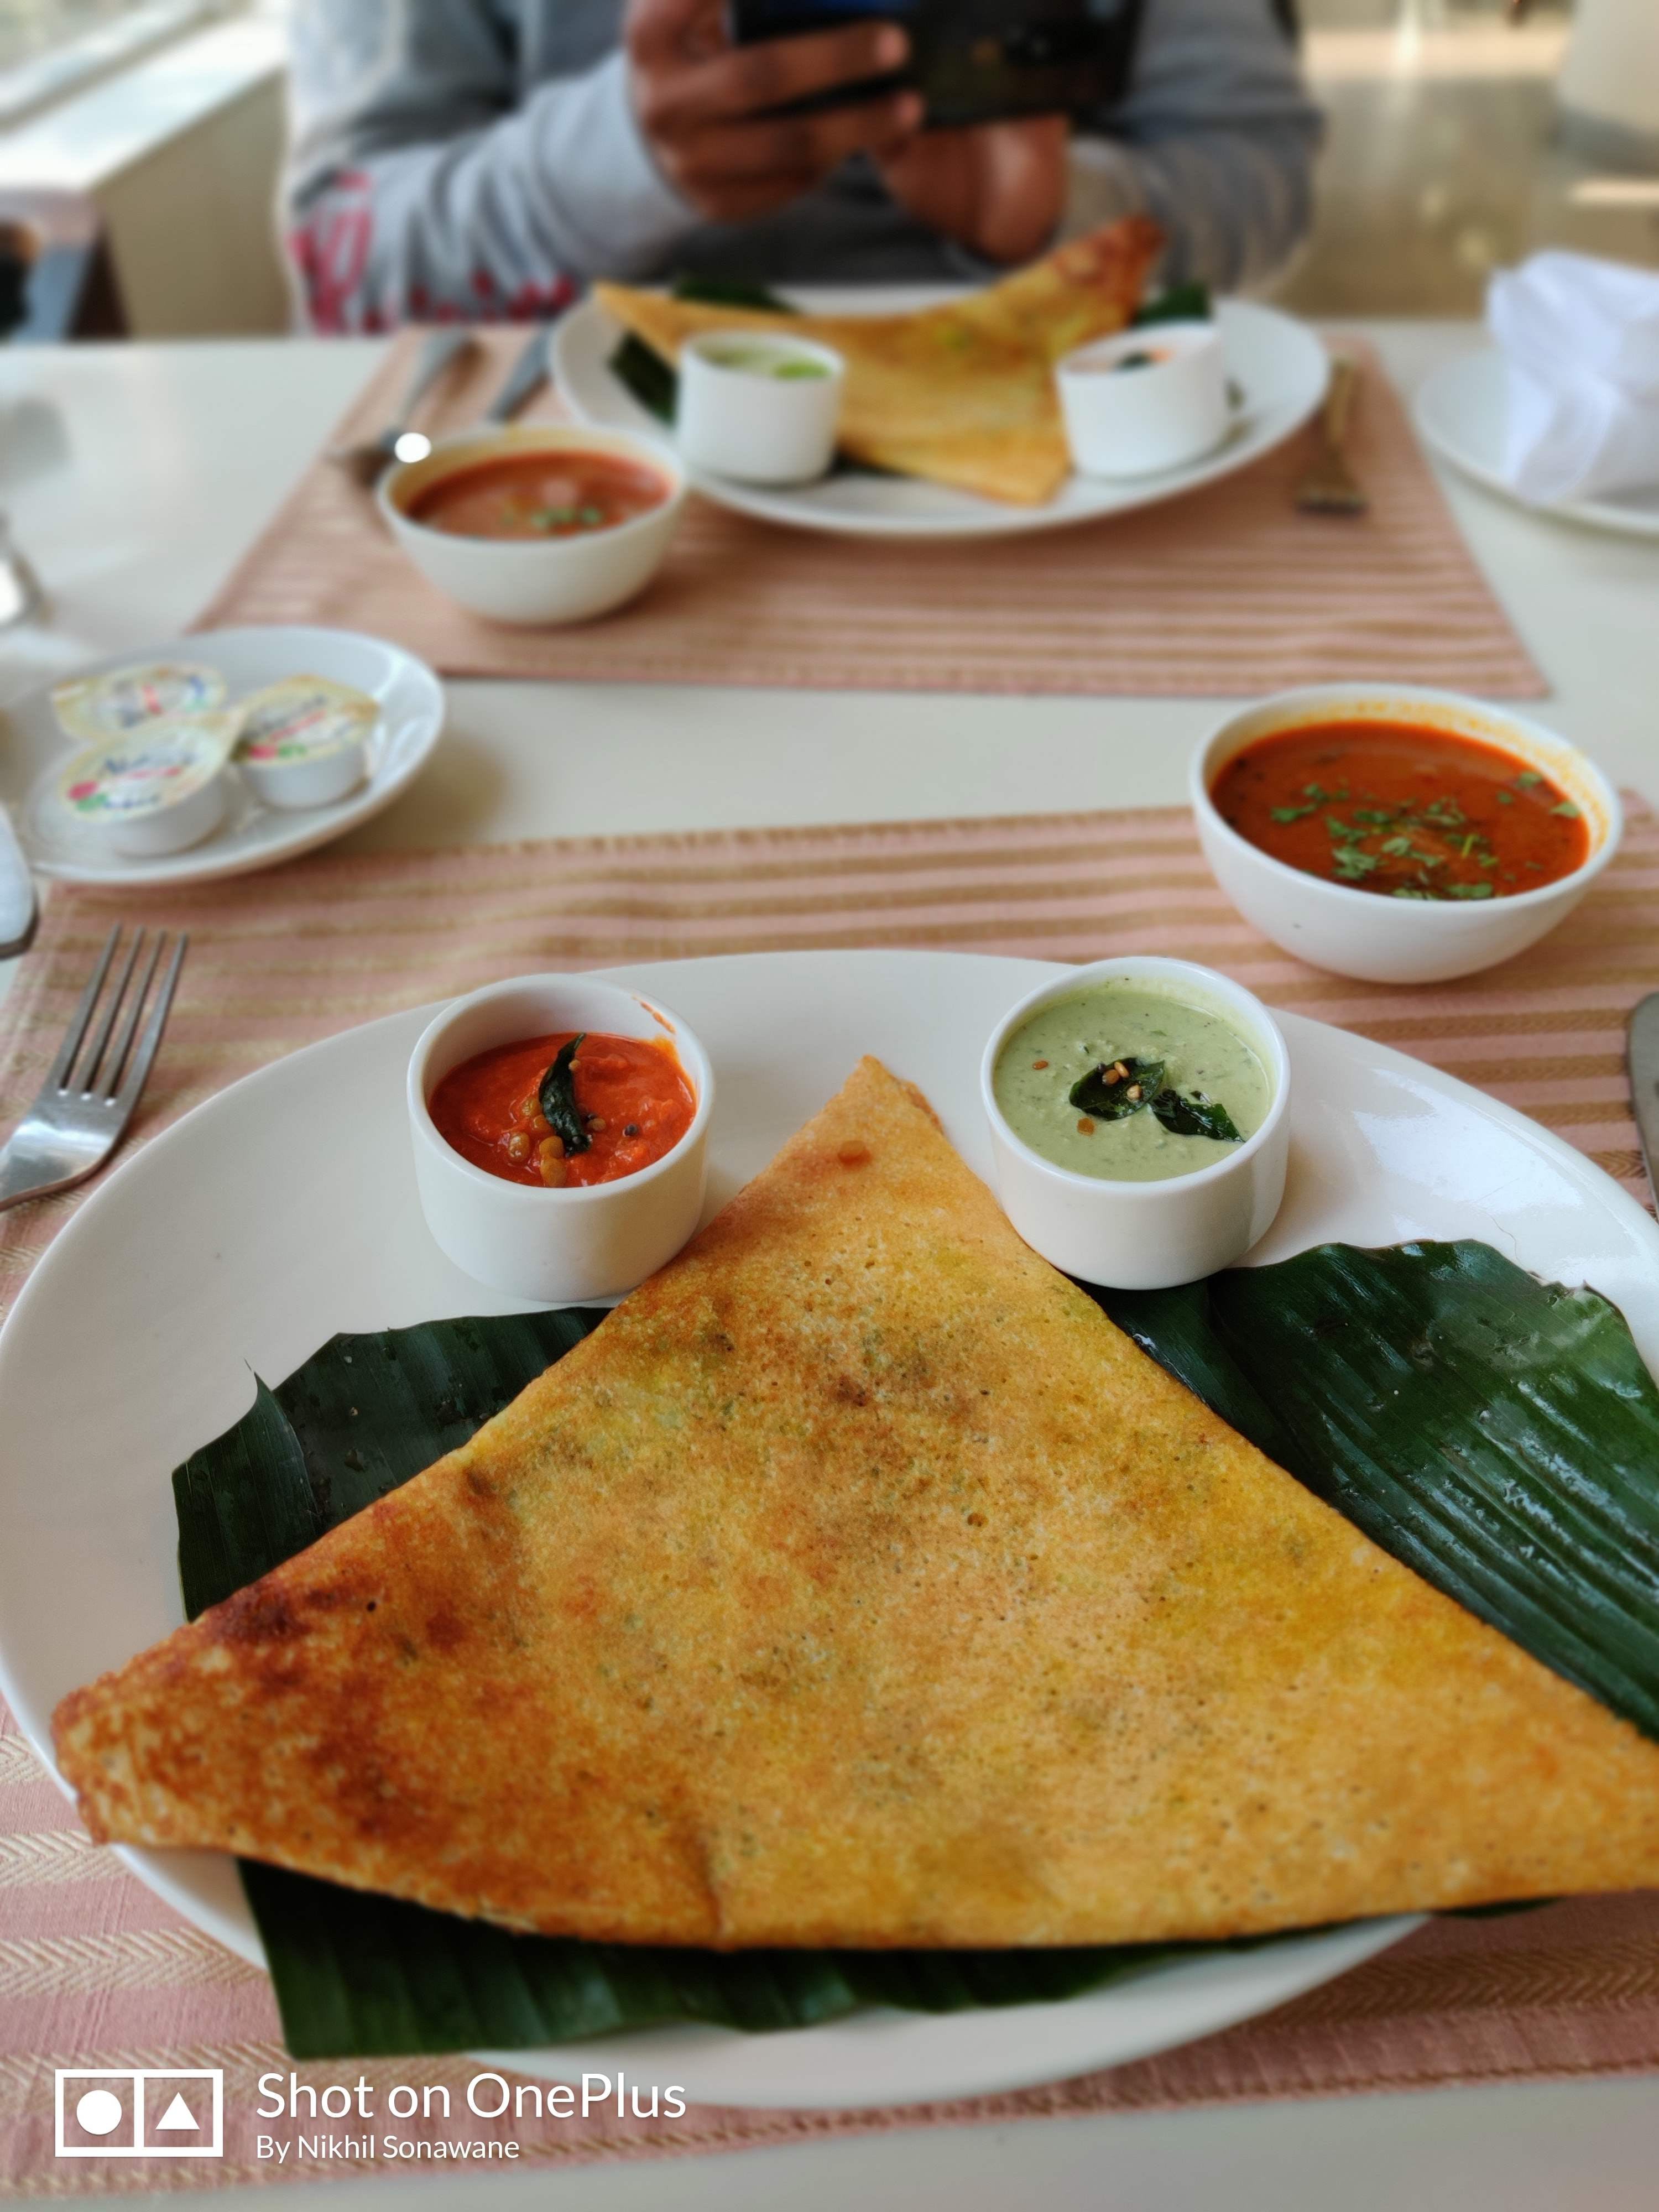 Dish,Food,Cuisine,Ingredient,Fried food,Produce,Dosa,Pastry,Meal,Breakfast